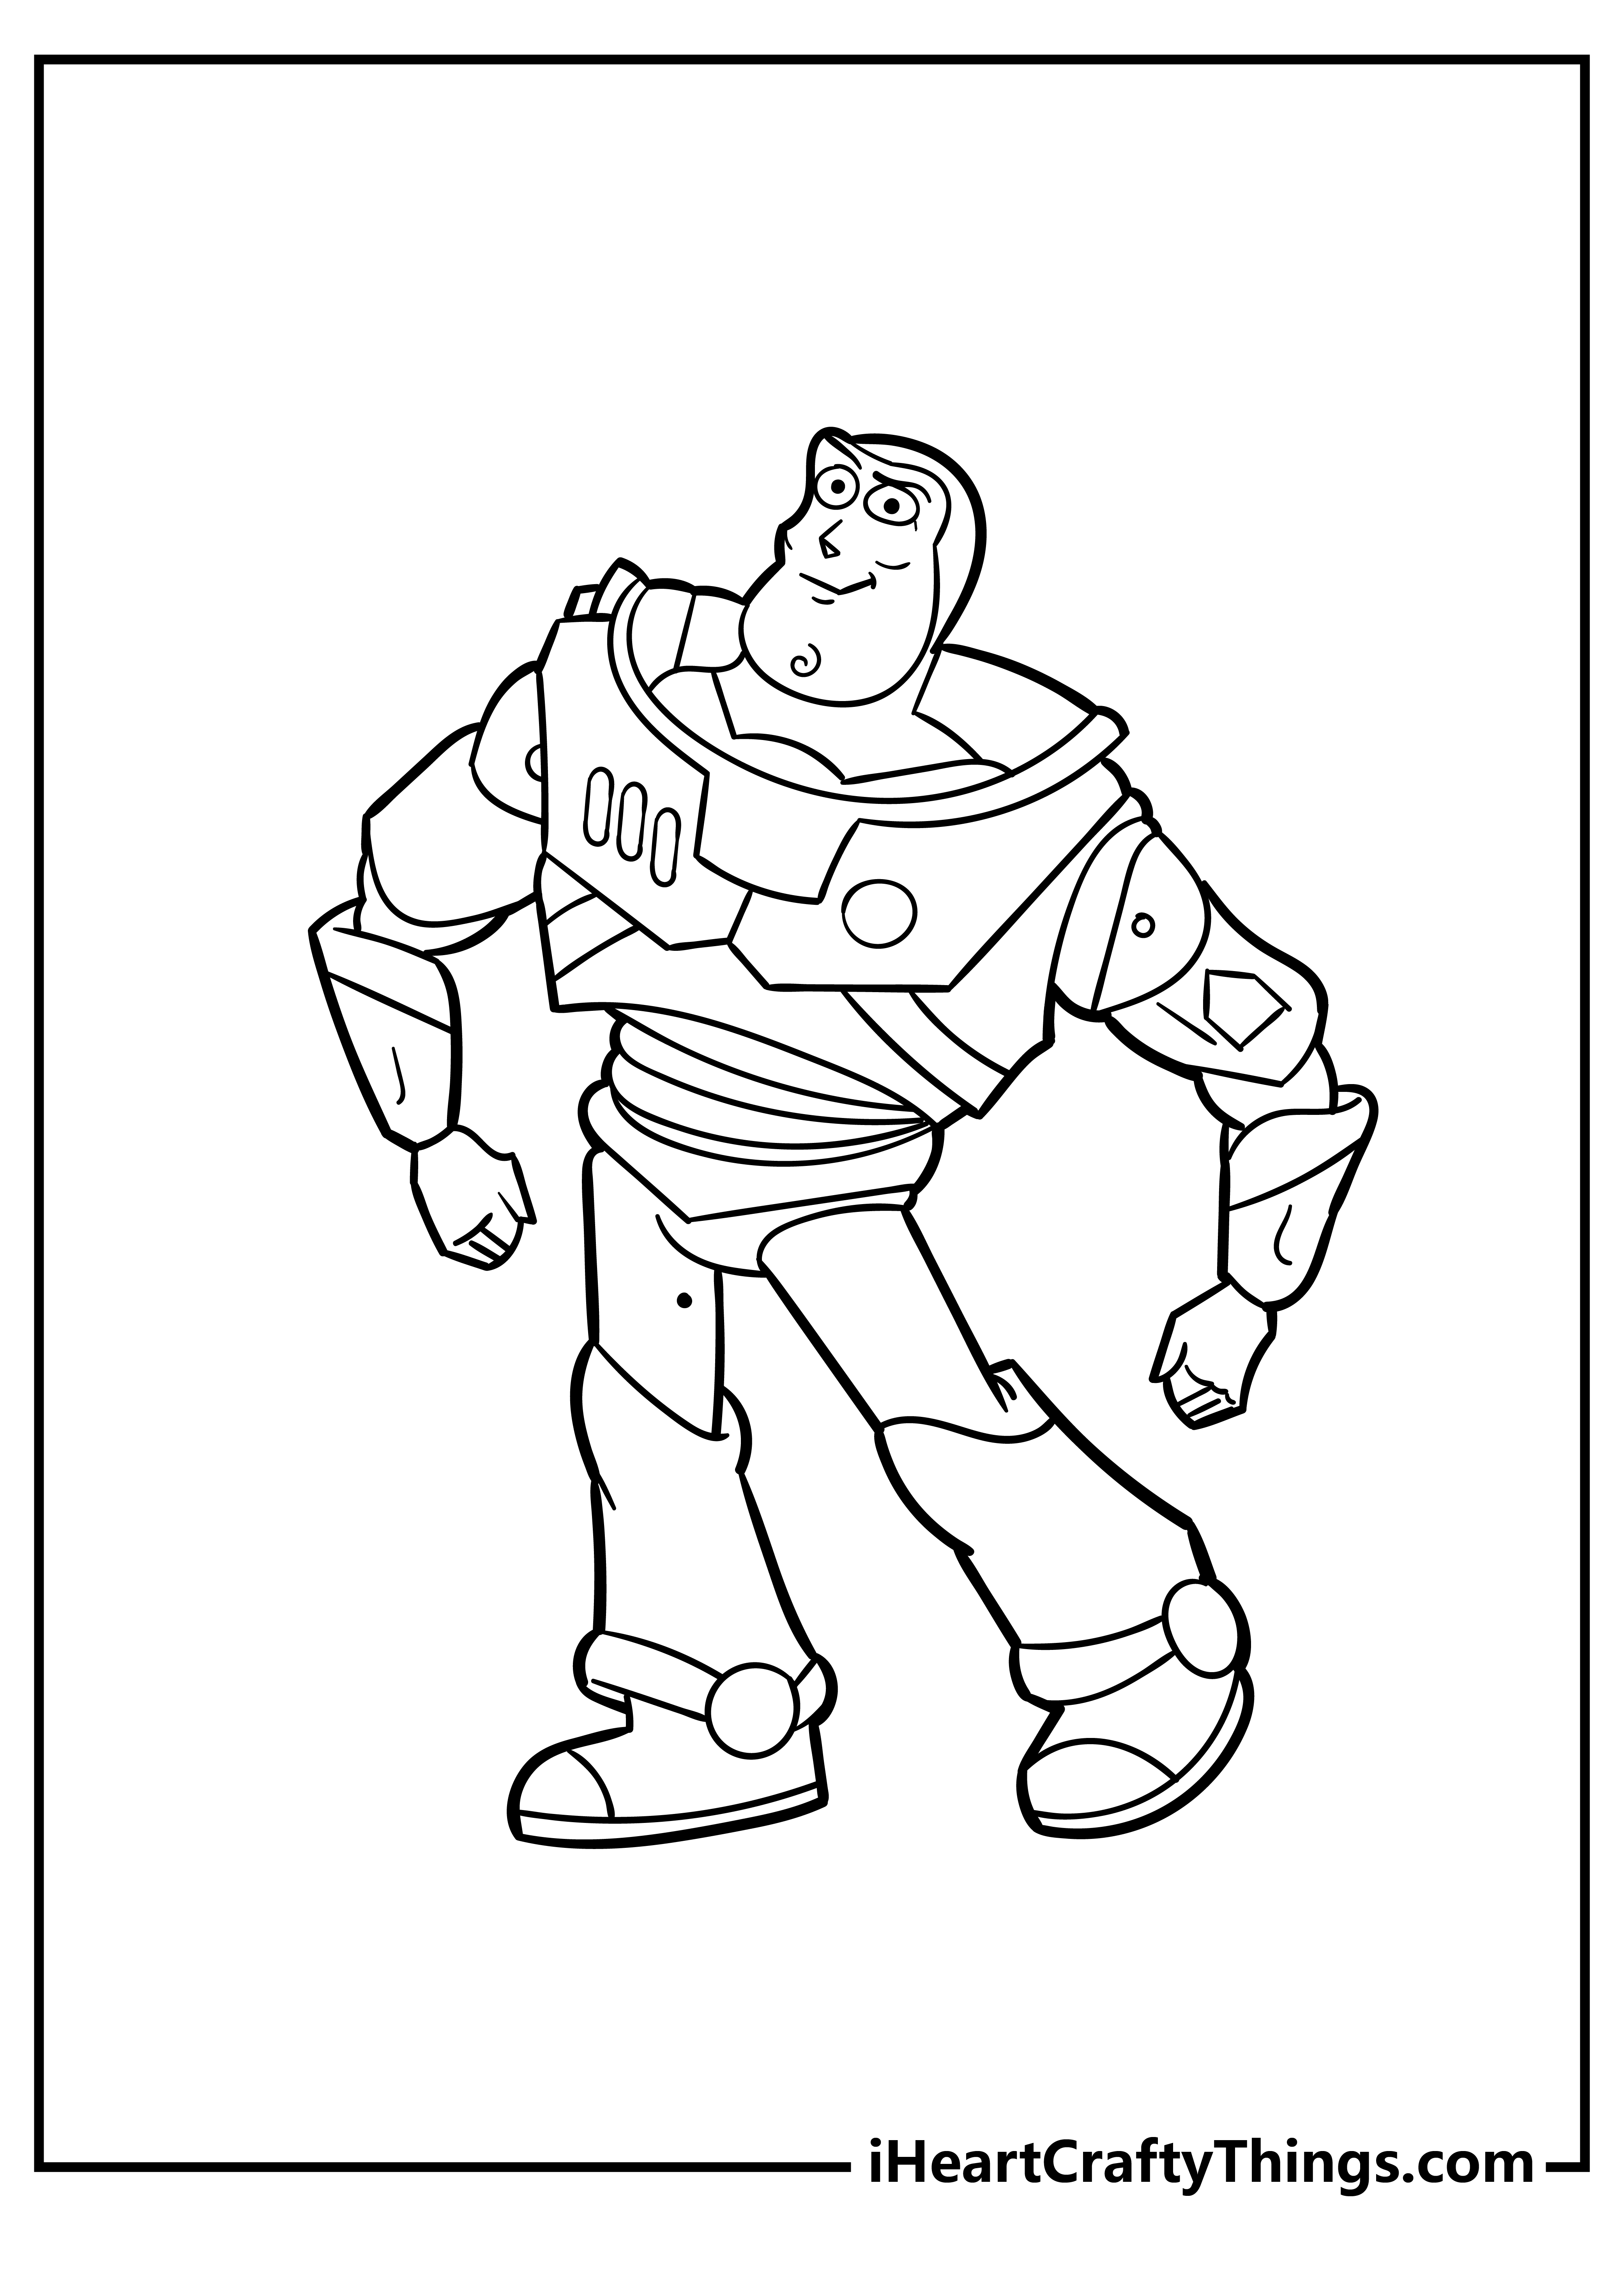 Buzz Lightyear Cartoon Coloring Book for adults free download